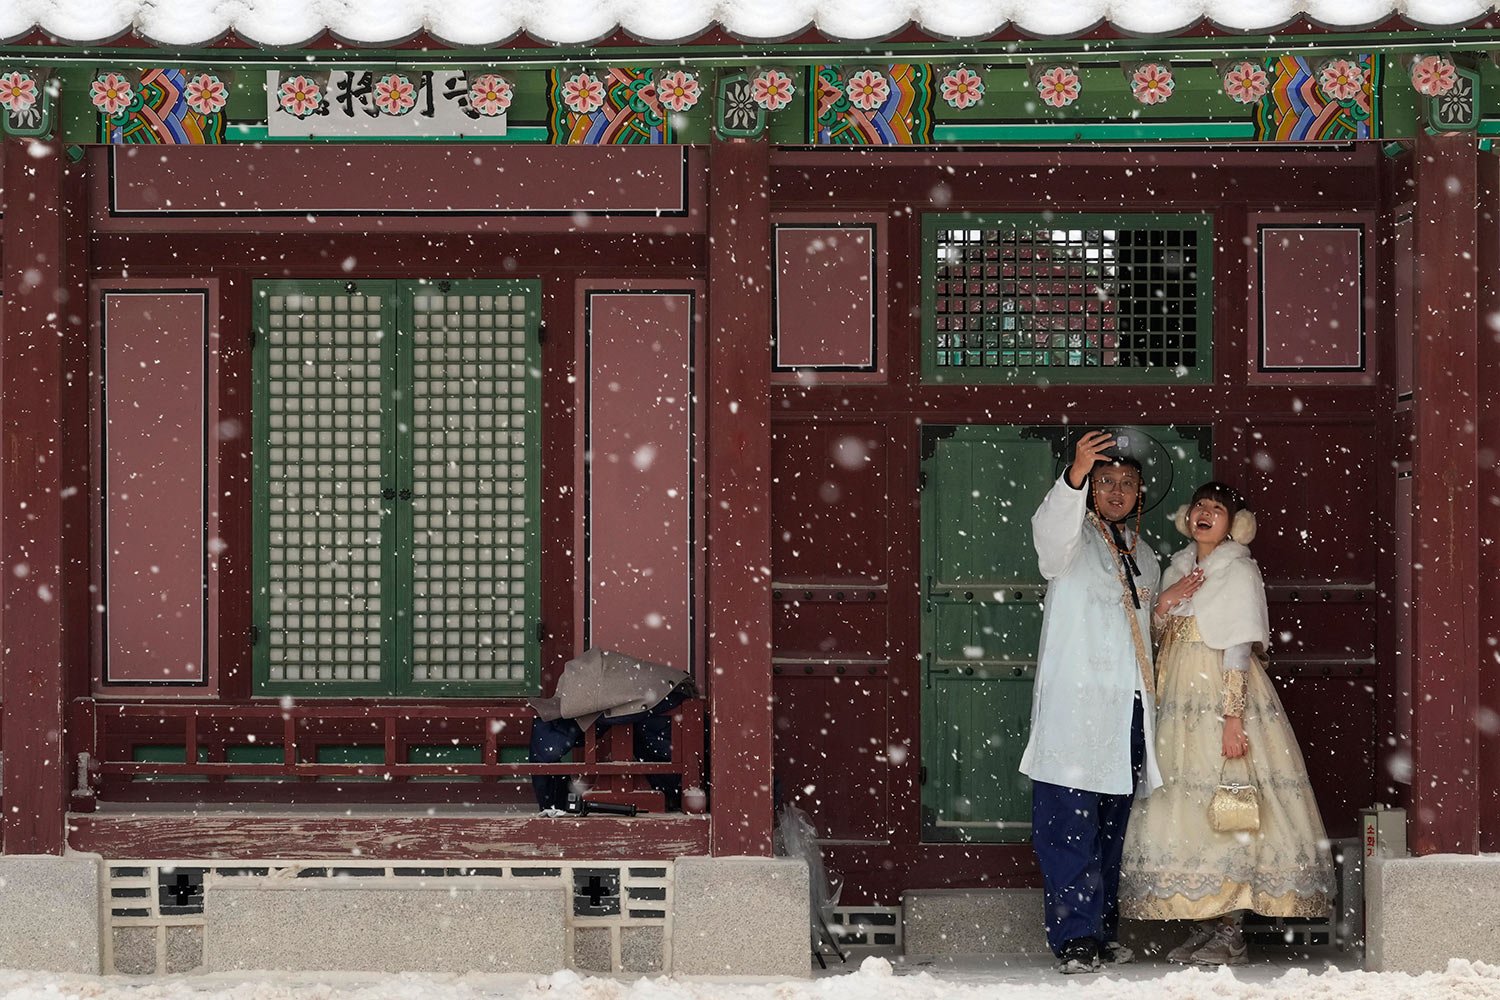  A couple wearing traditional "Hanbok" outfits take a selfie in the snow at the Gyeongbok Palace, the main royal palace during the Joseon Dynasty and one of South Korea's well known landmarks, in Seoul, South Korea, Thursday, Jan. 26, 2023. (AP Photo